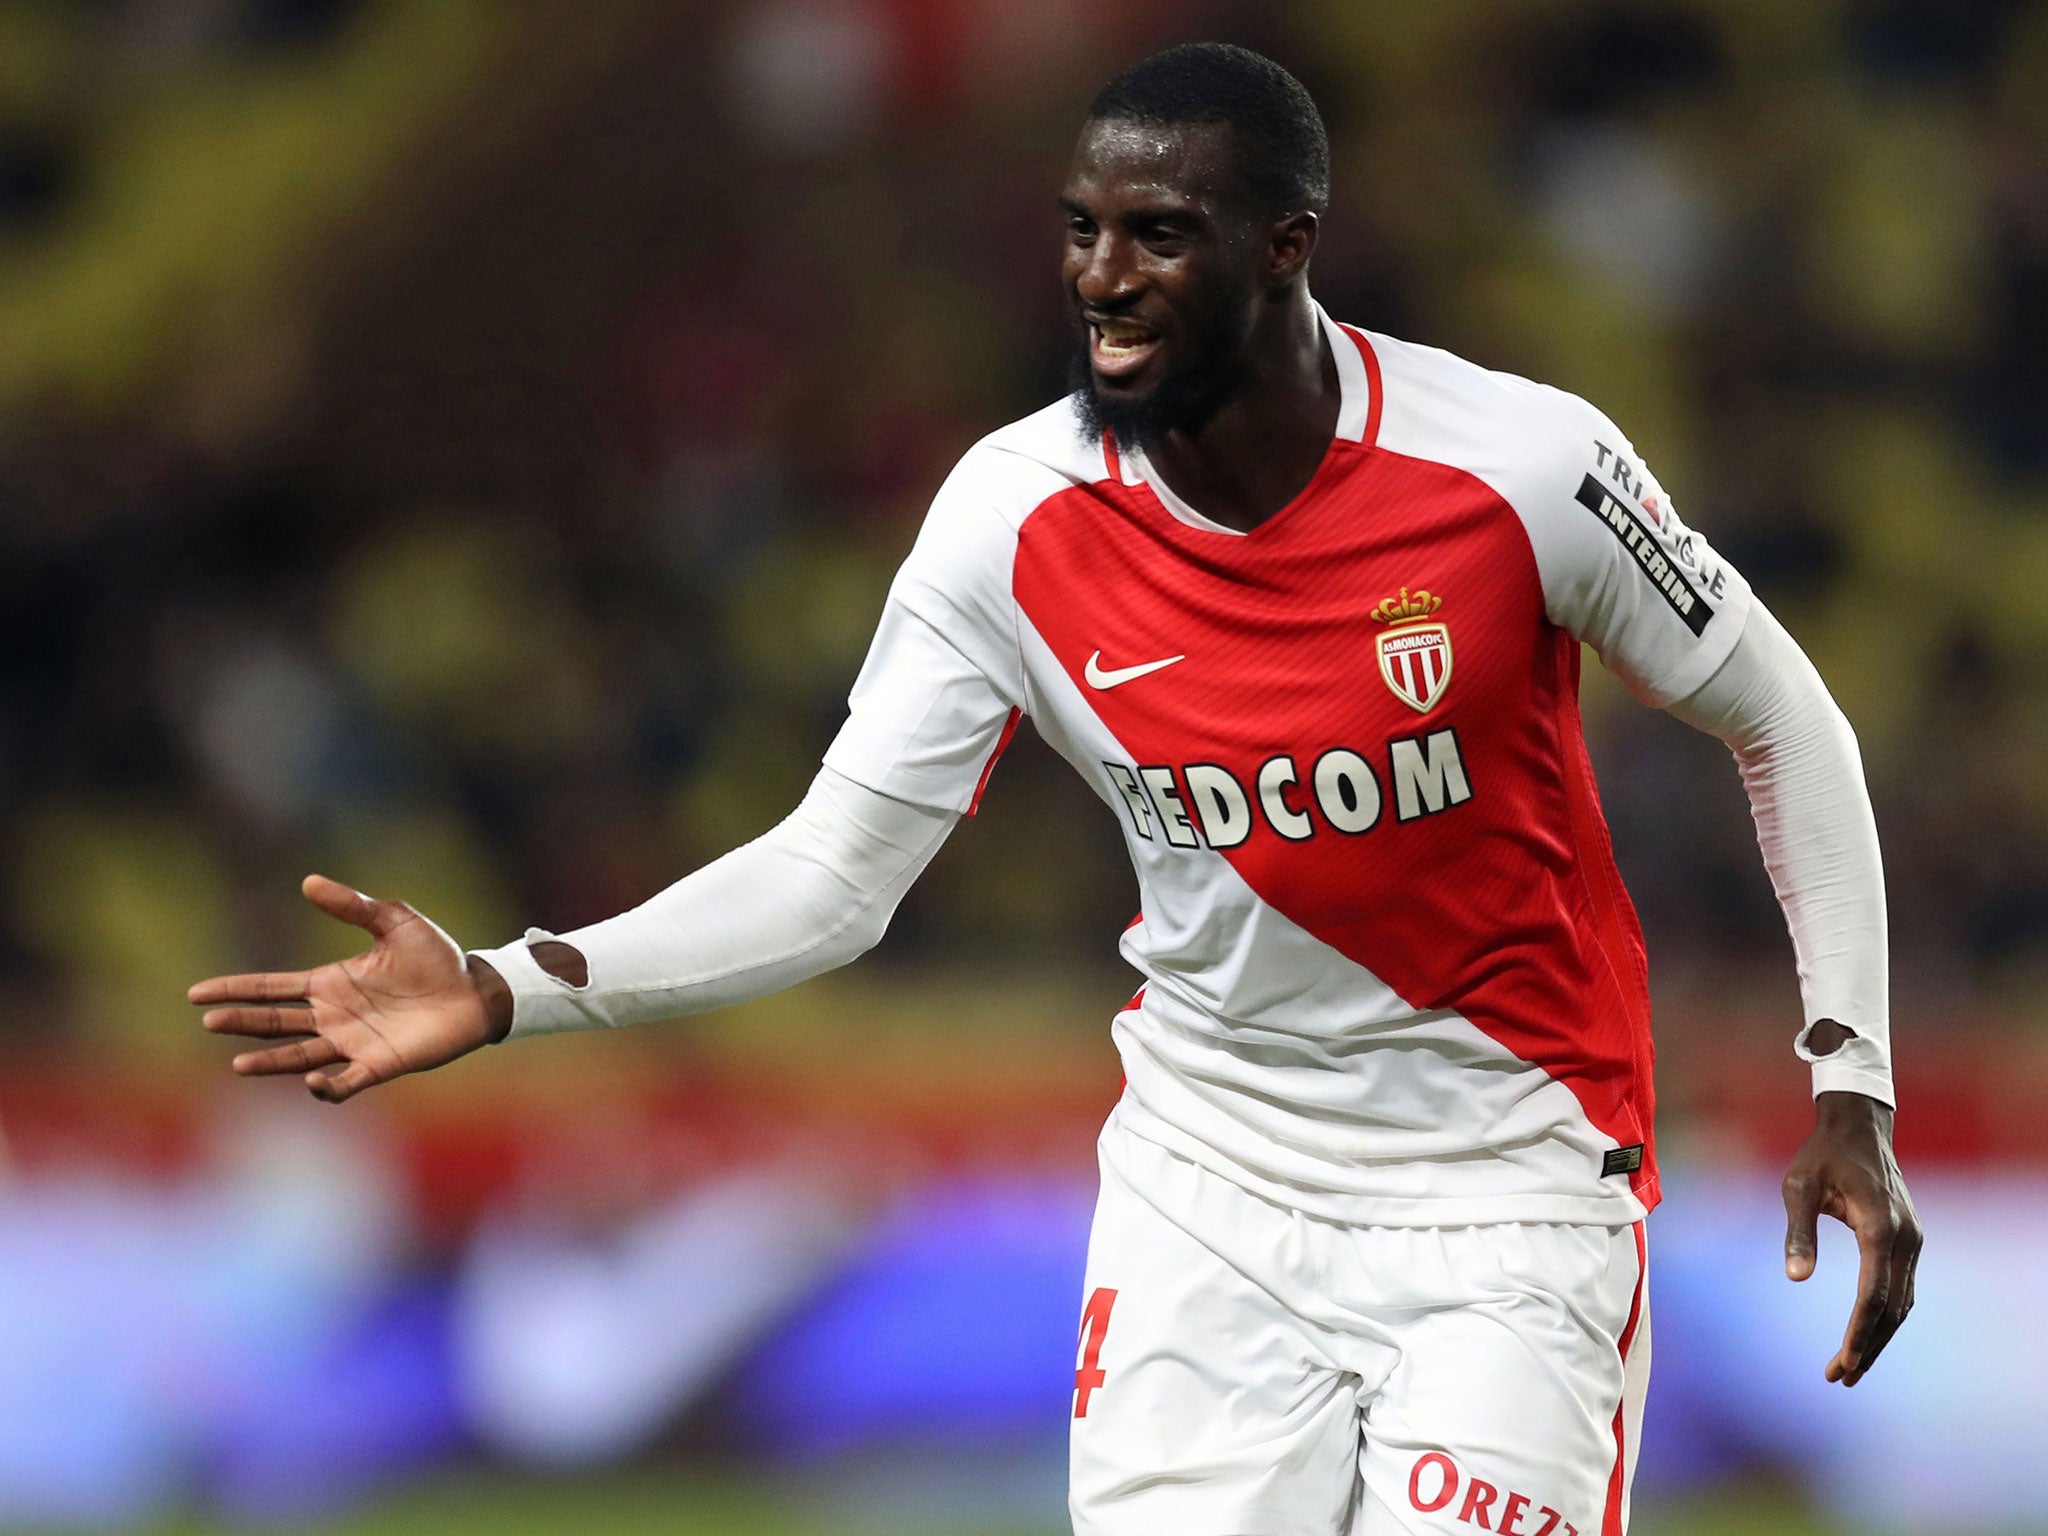 Tiemoue Bakayoko has emerged as one Europe's most promising young talents